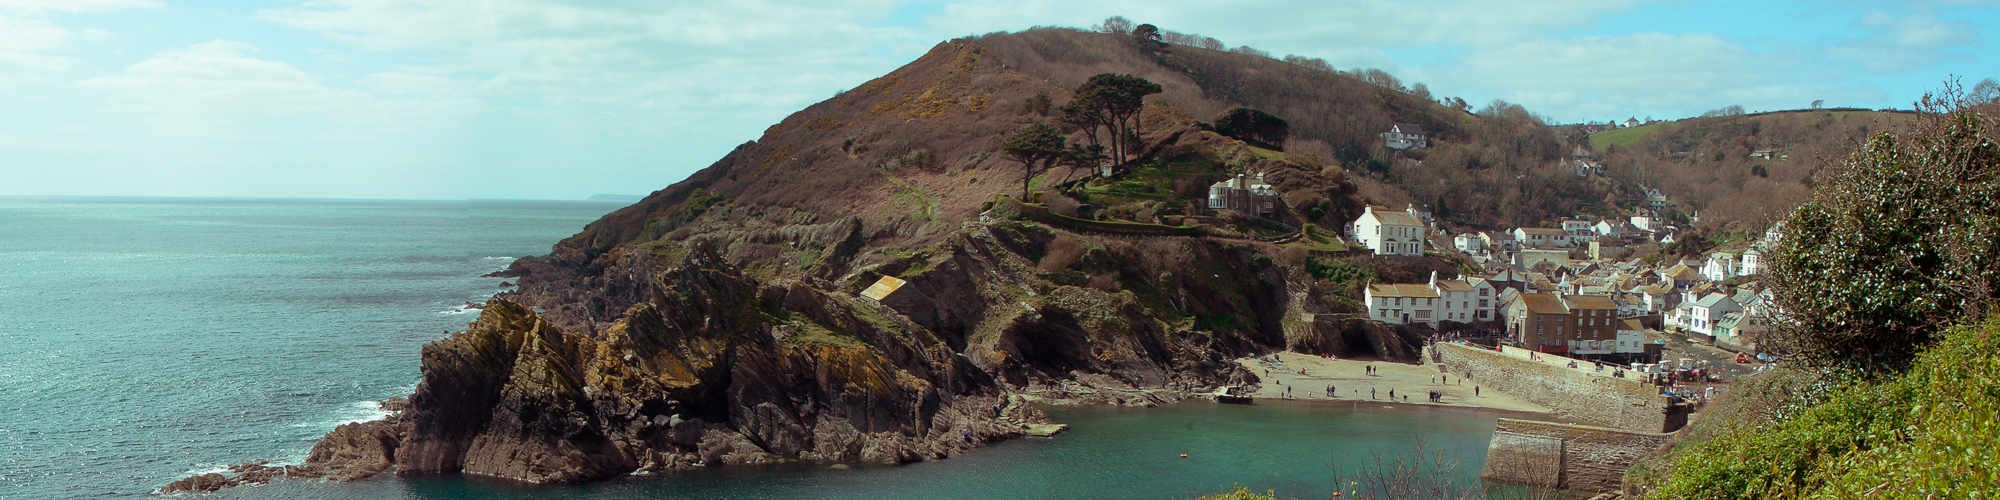 Talland House and Laity, Polperro, Cornwall